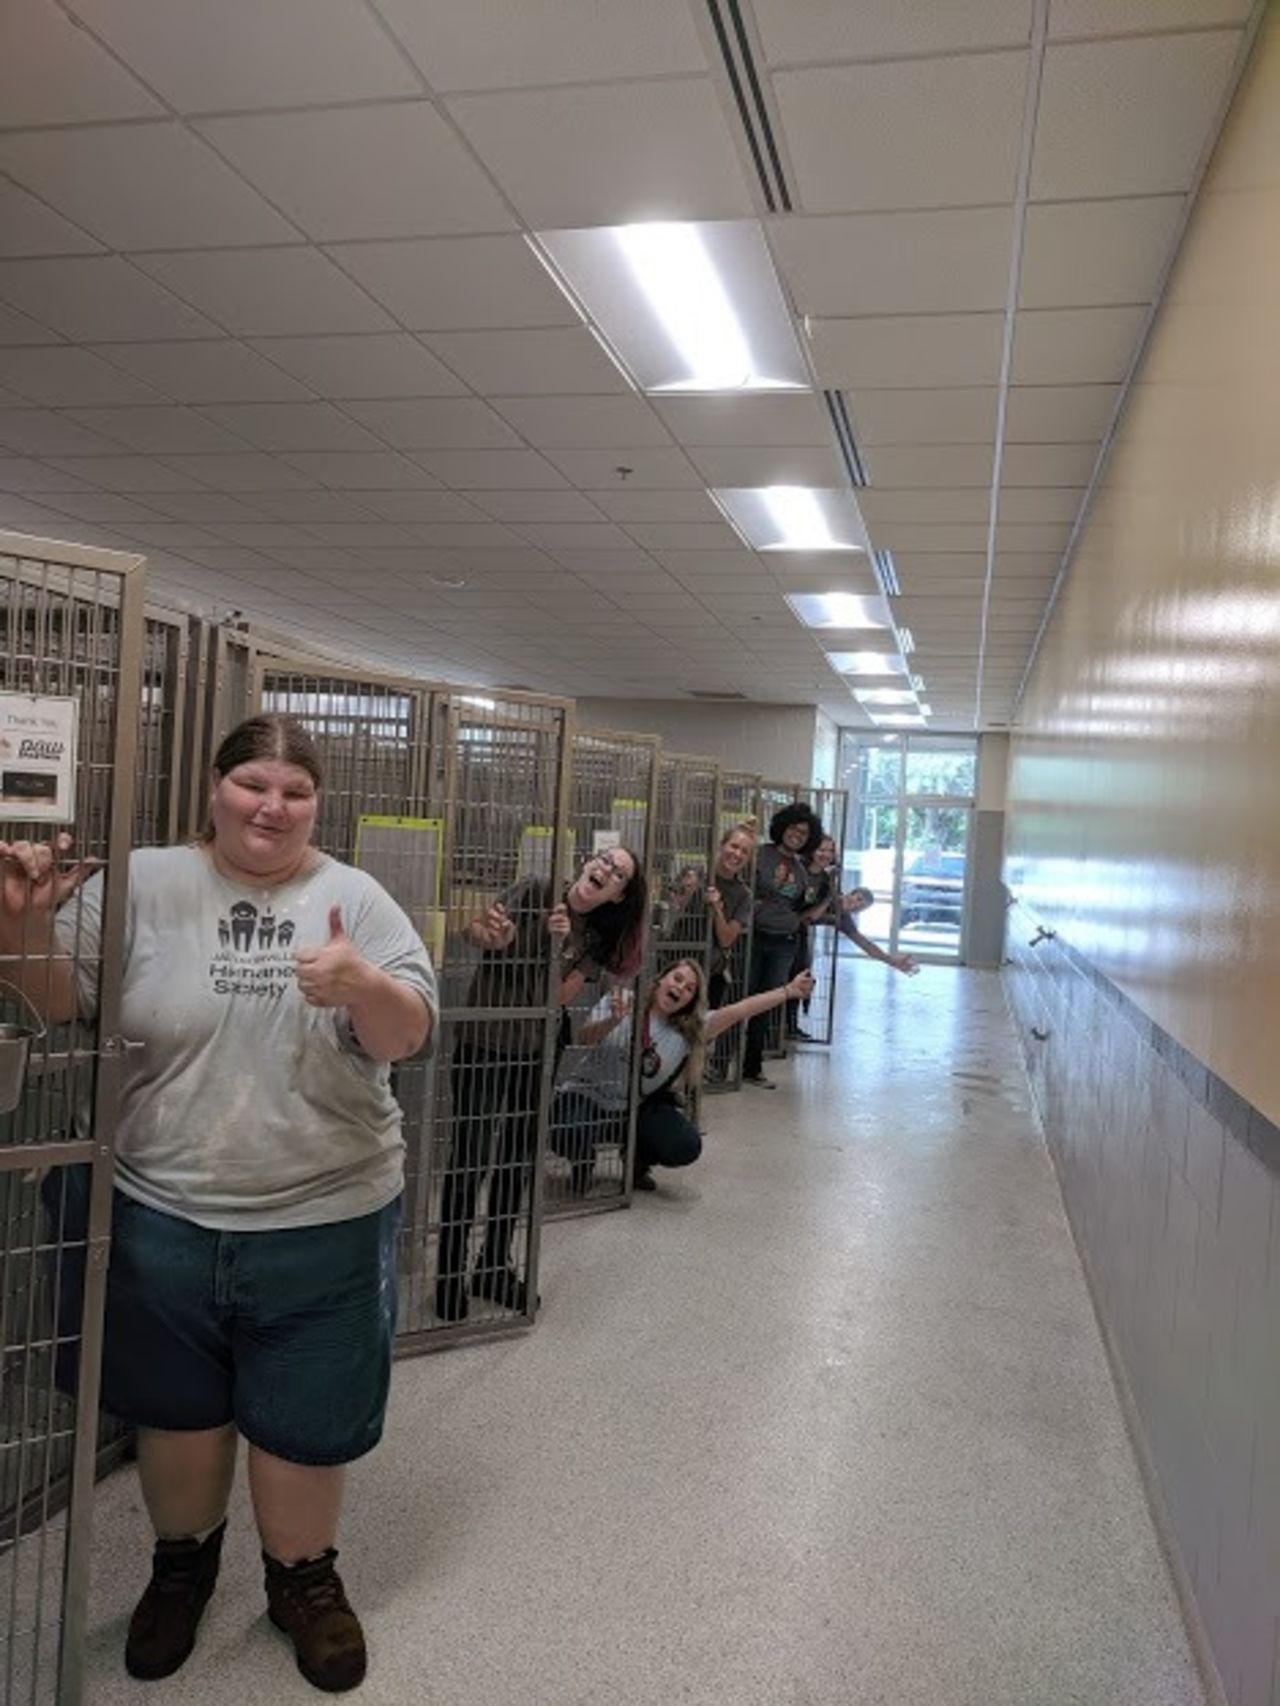 Staff at the Jacksonville Humane Society, where hundreds of shelter dogs and cats found temporary foster homes ahead of Dorian.